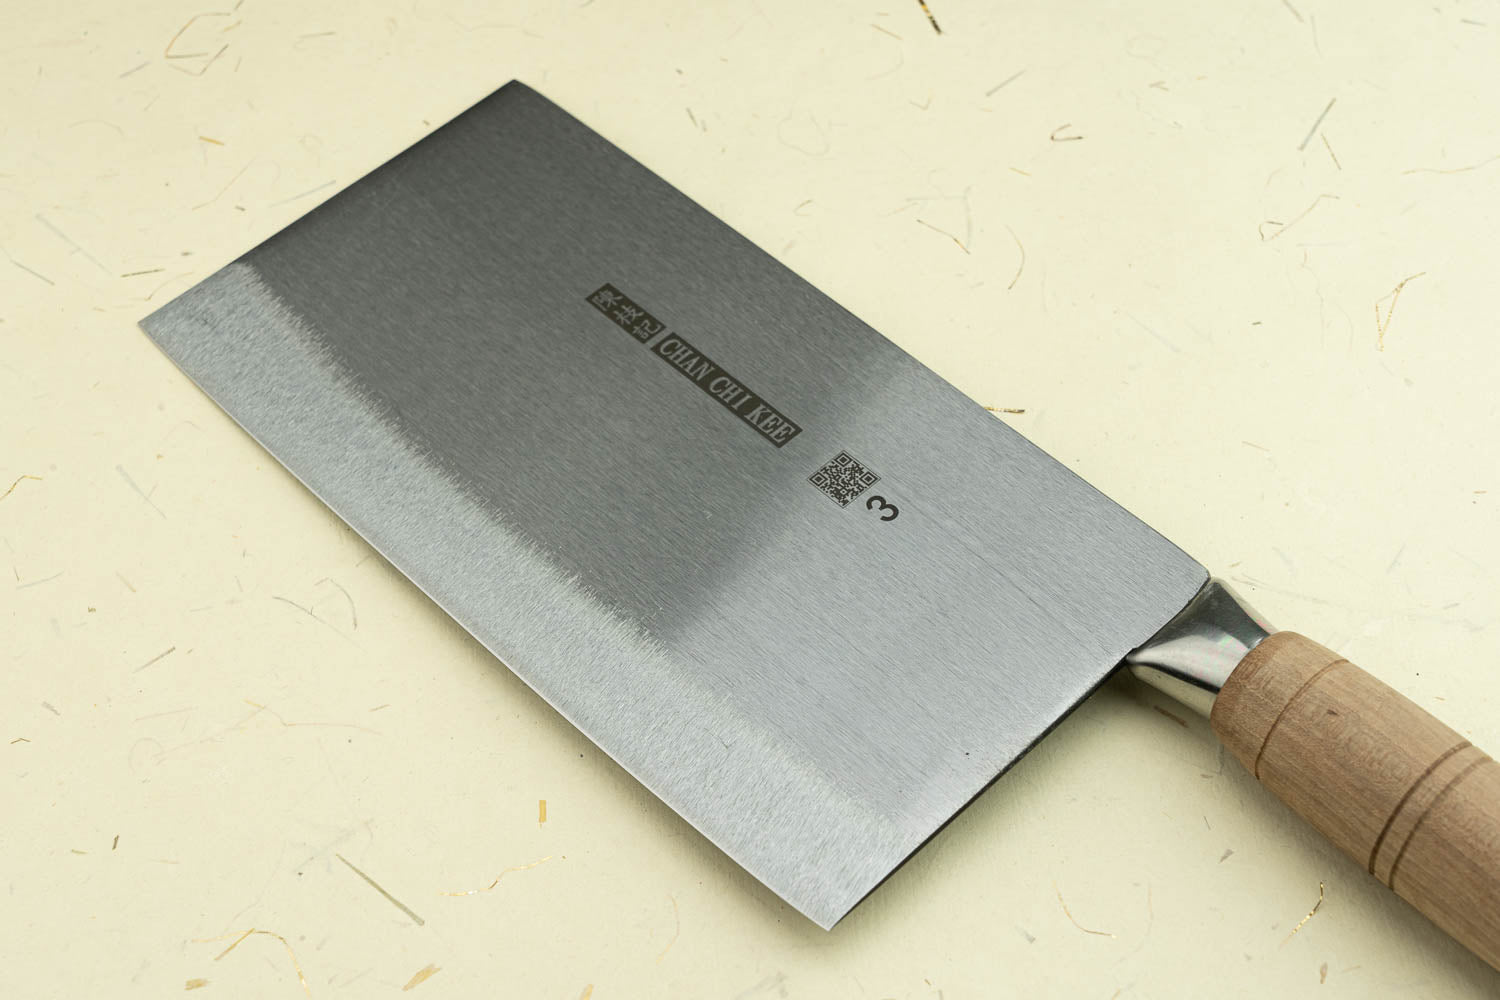 CCK Cleaver "Civil and Military" Kitchen Chopper Knife 215mm - KF1203